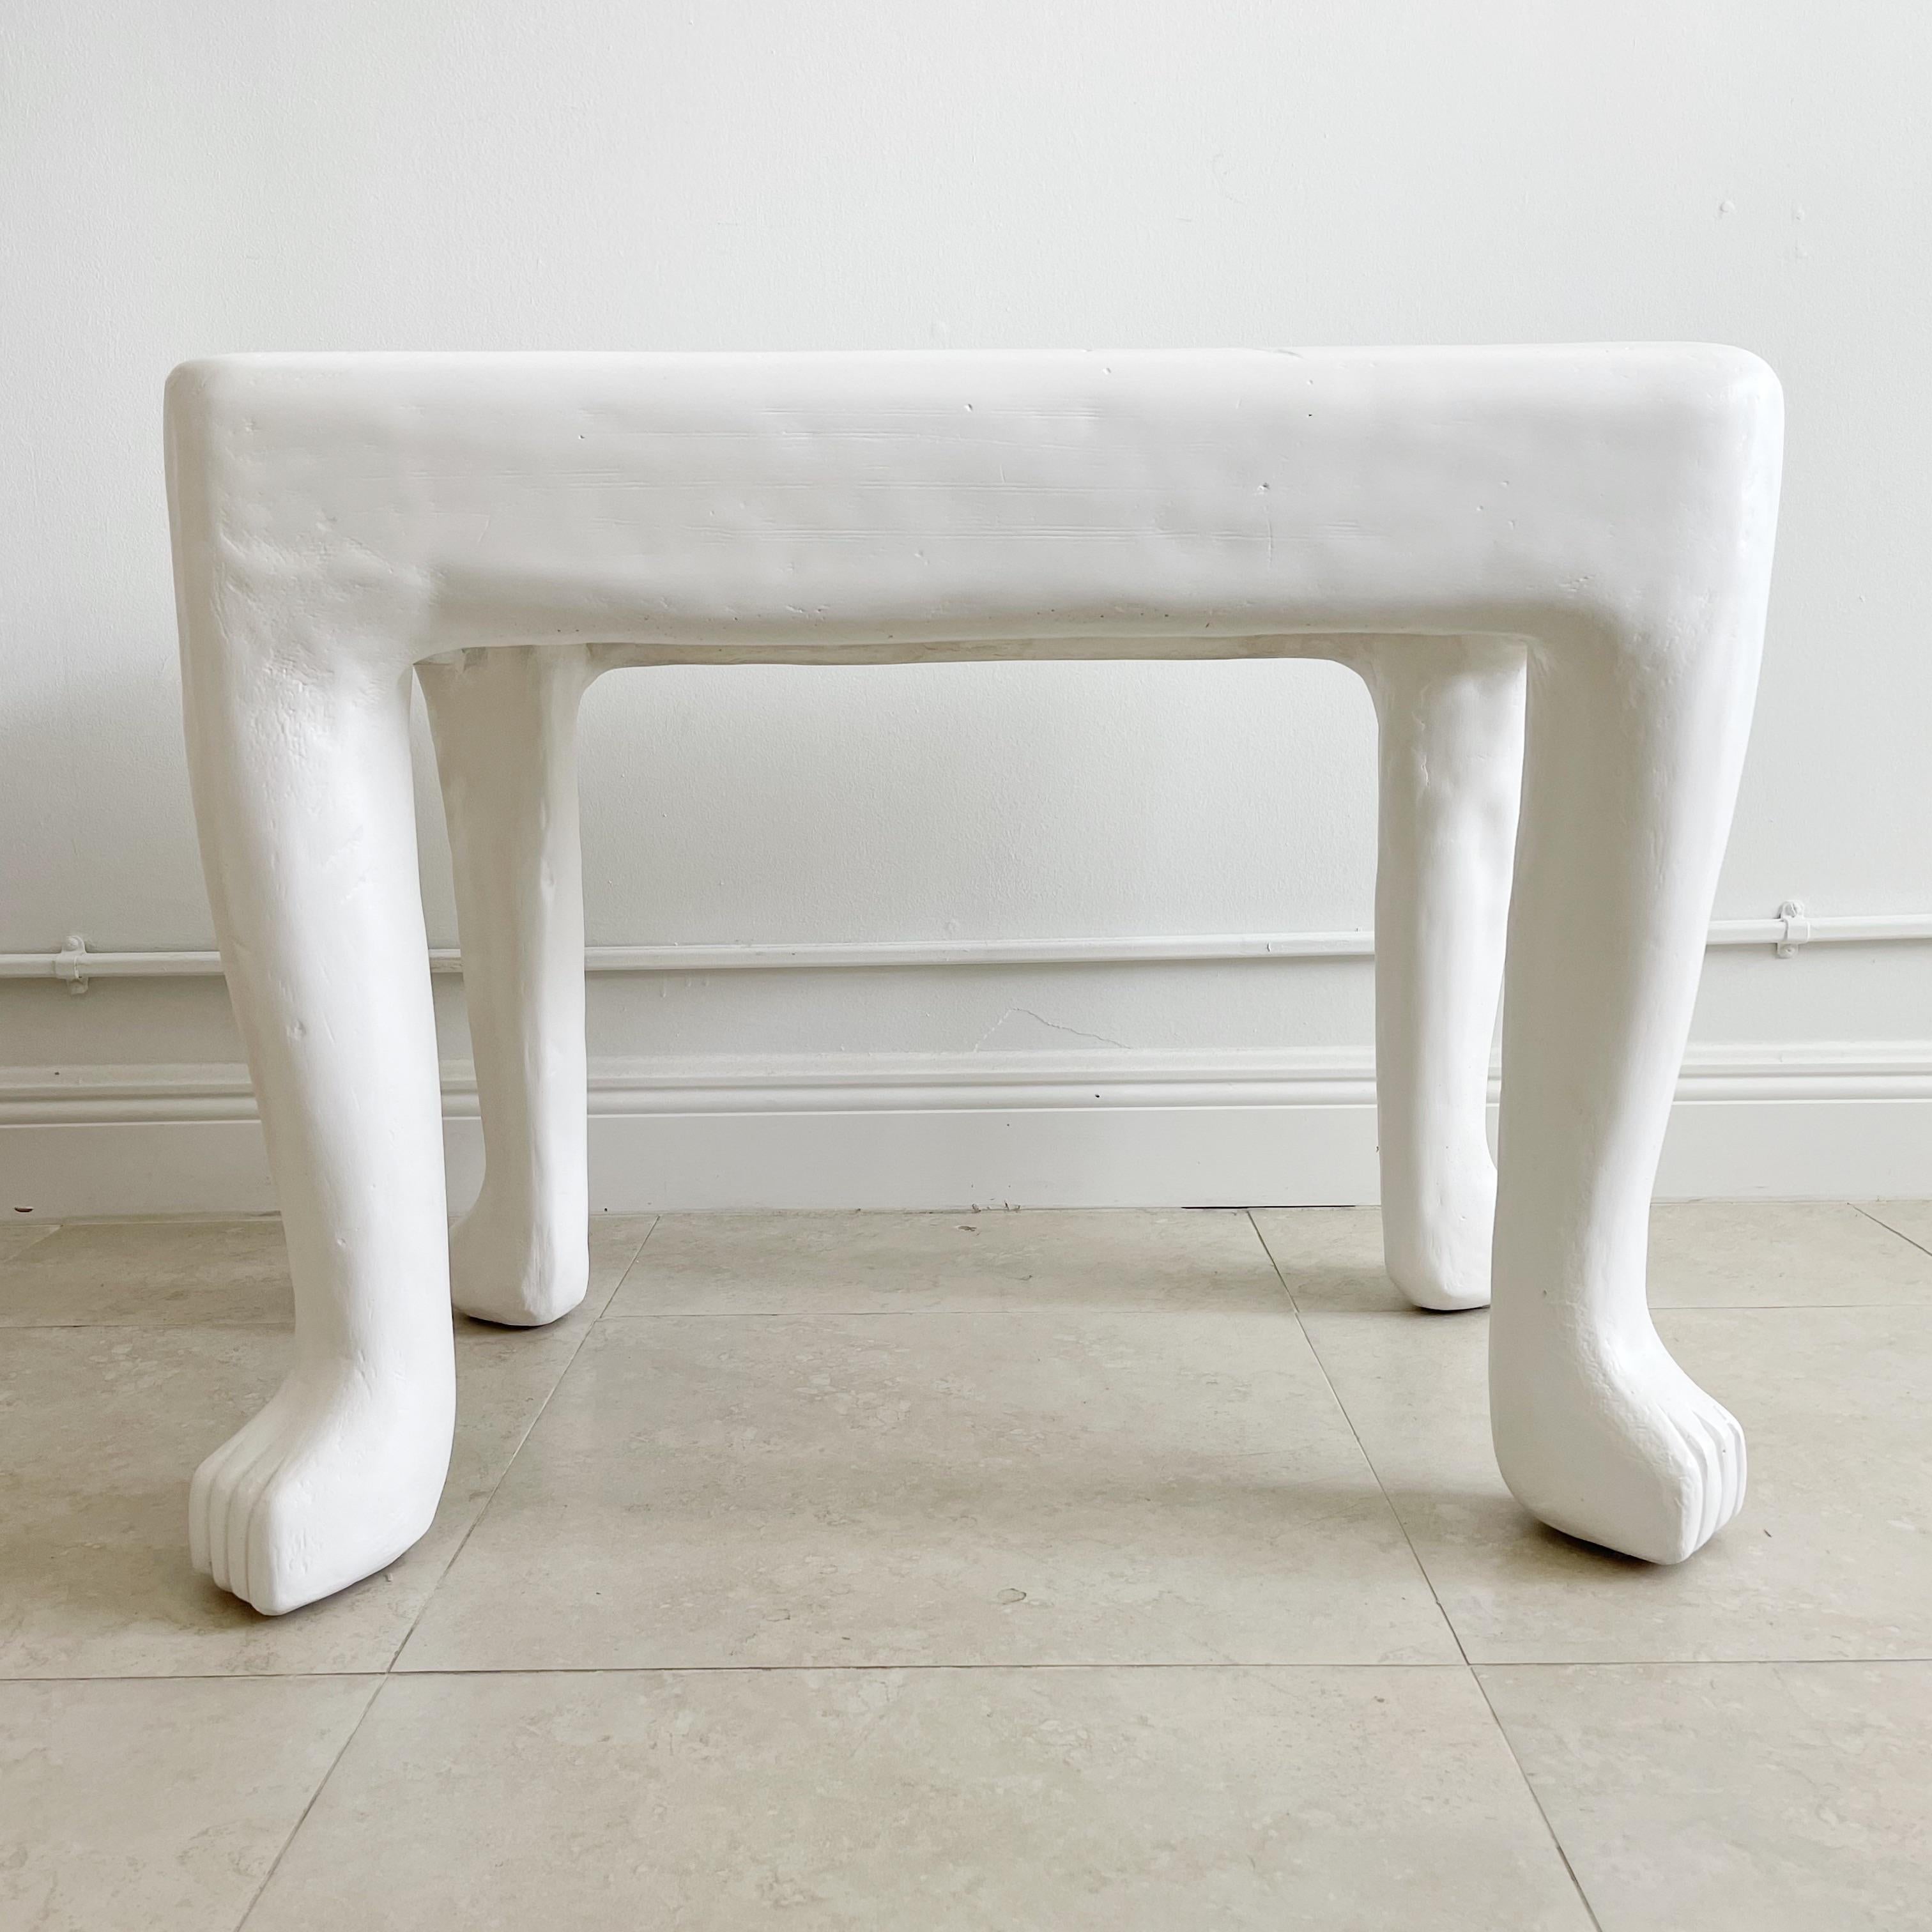 From the imagination of John Dickinson (1919-1982), we offer this authentic, iconic occasional table fashioned of cast plaster over rebar. The primitive animal paw-legged piece is a superb example of Dickinson's work, and a masterpiece of mid